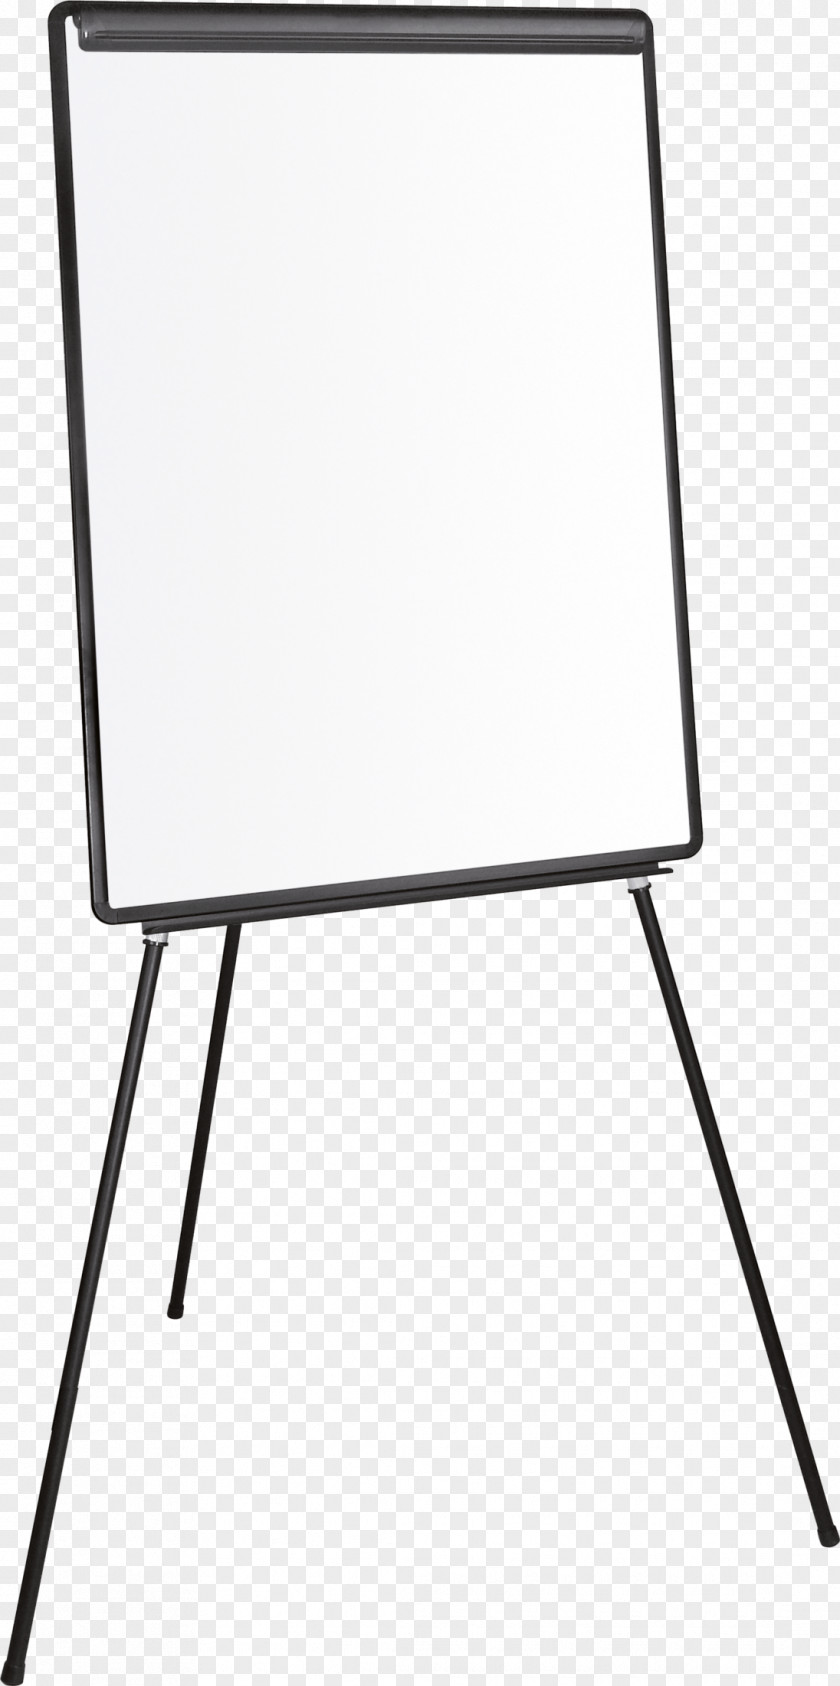 Eraser And Hand Whiteboard Easel Flip Chart Tripod Computer Monitor Accessory Dry-Erase Boards PNG